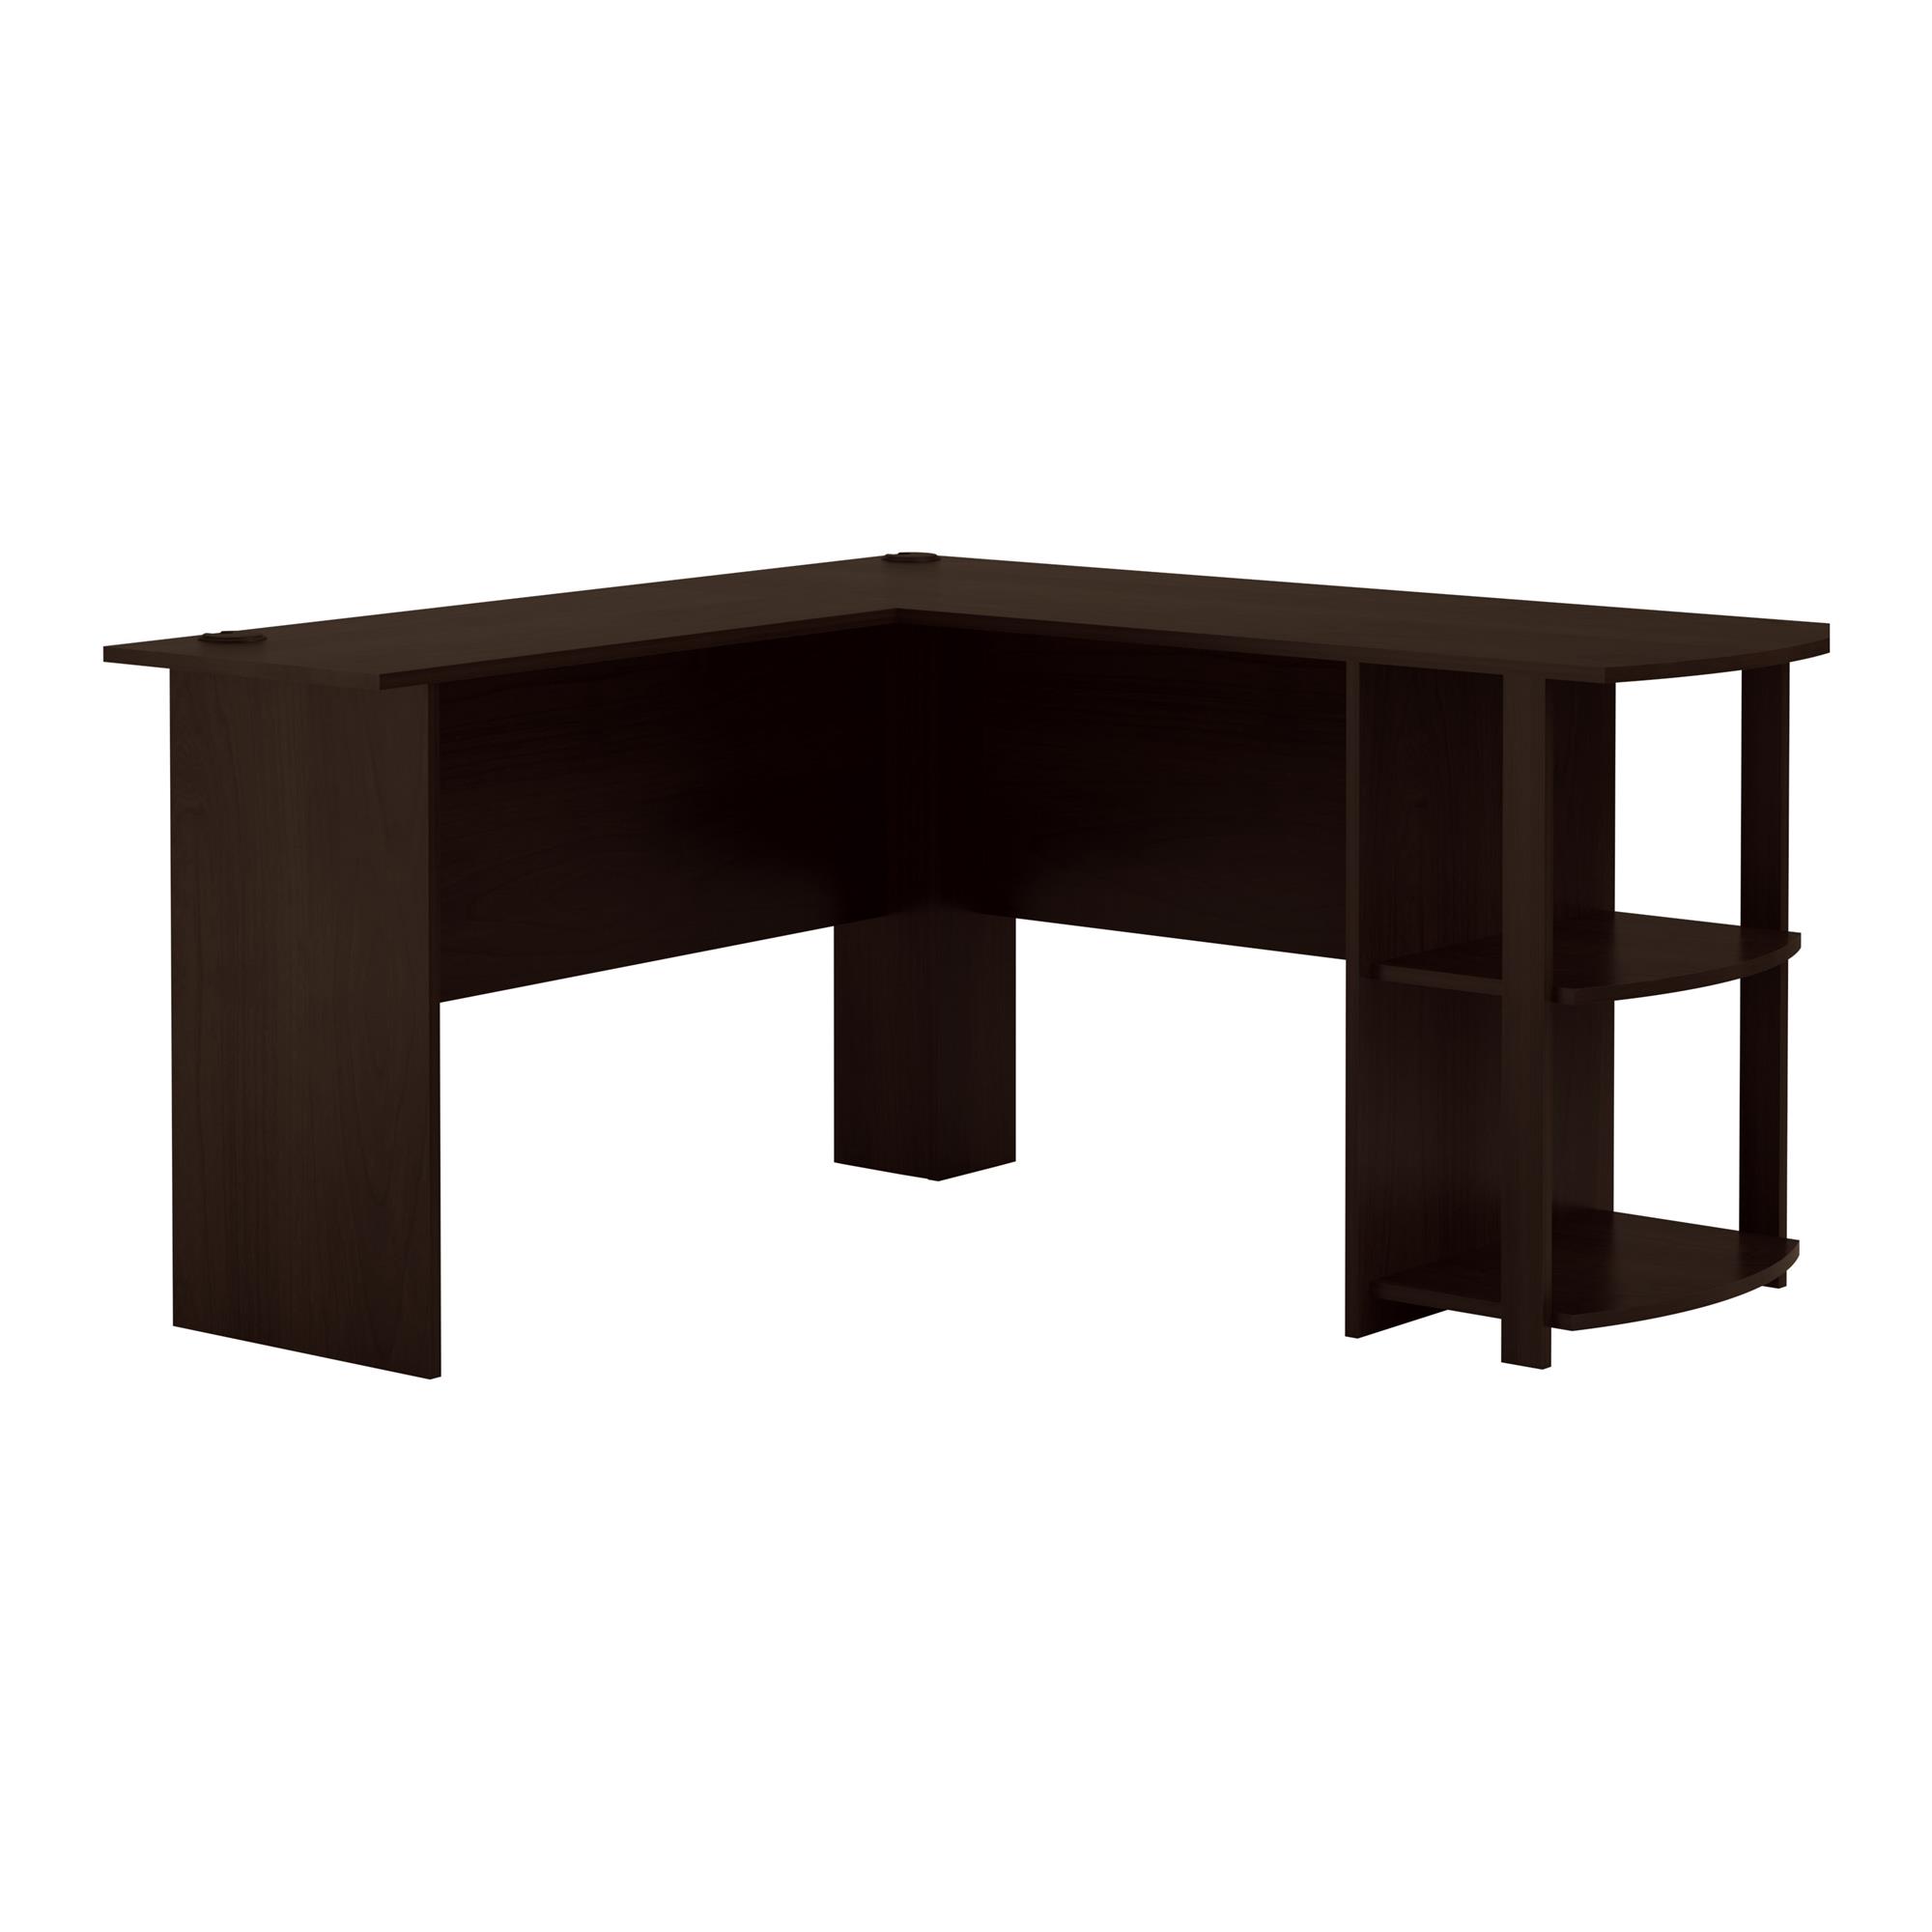 Ameriwood Home Dominic L Desk with Bookshelves, Espresso - image 2 of 12